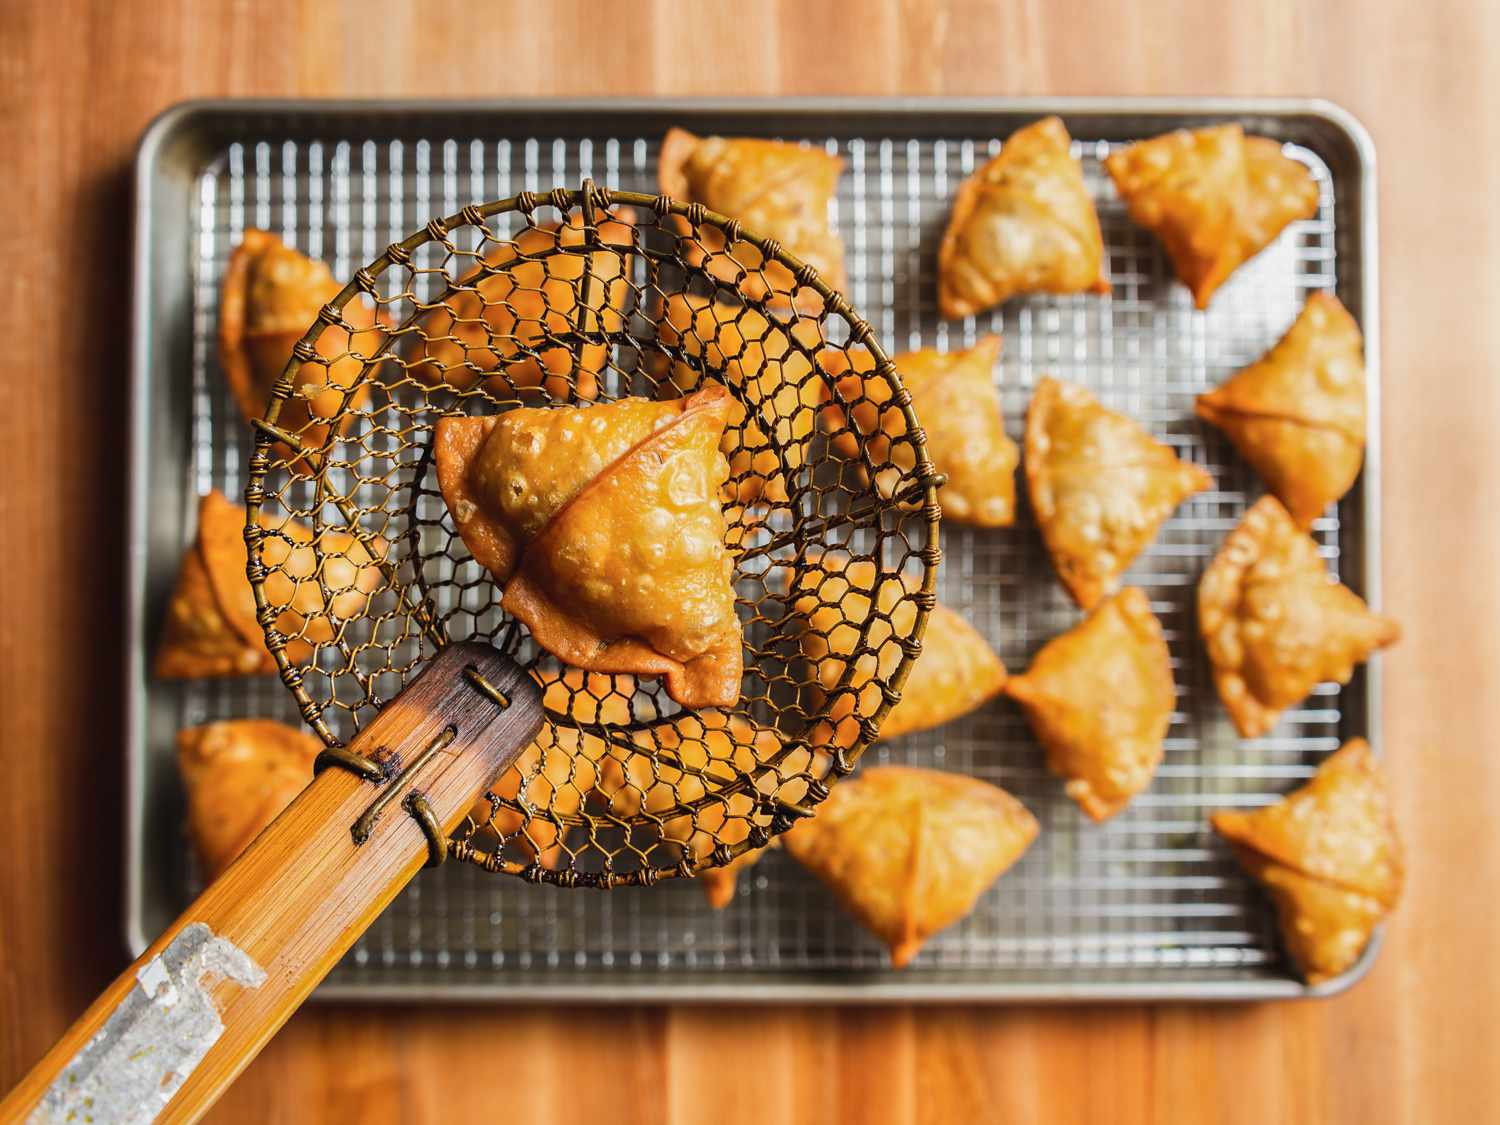 Fried samosa in a spider strainer held aloft a rimmed baking sheet with a wire rack set into it with samosas cooling on top